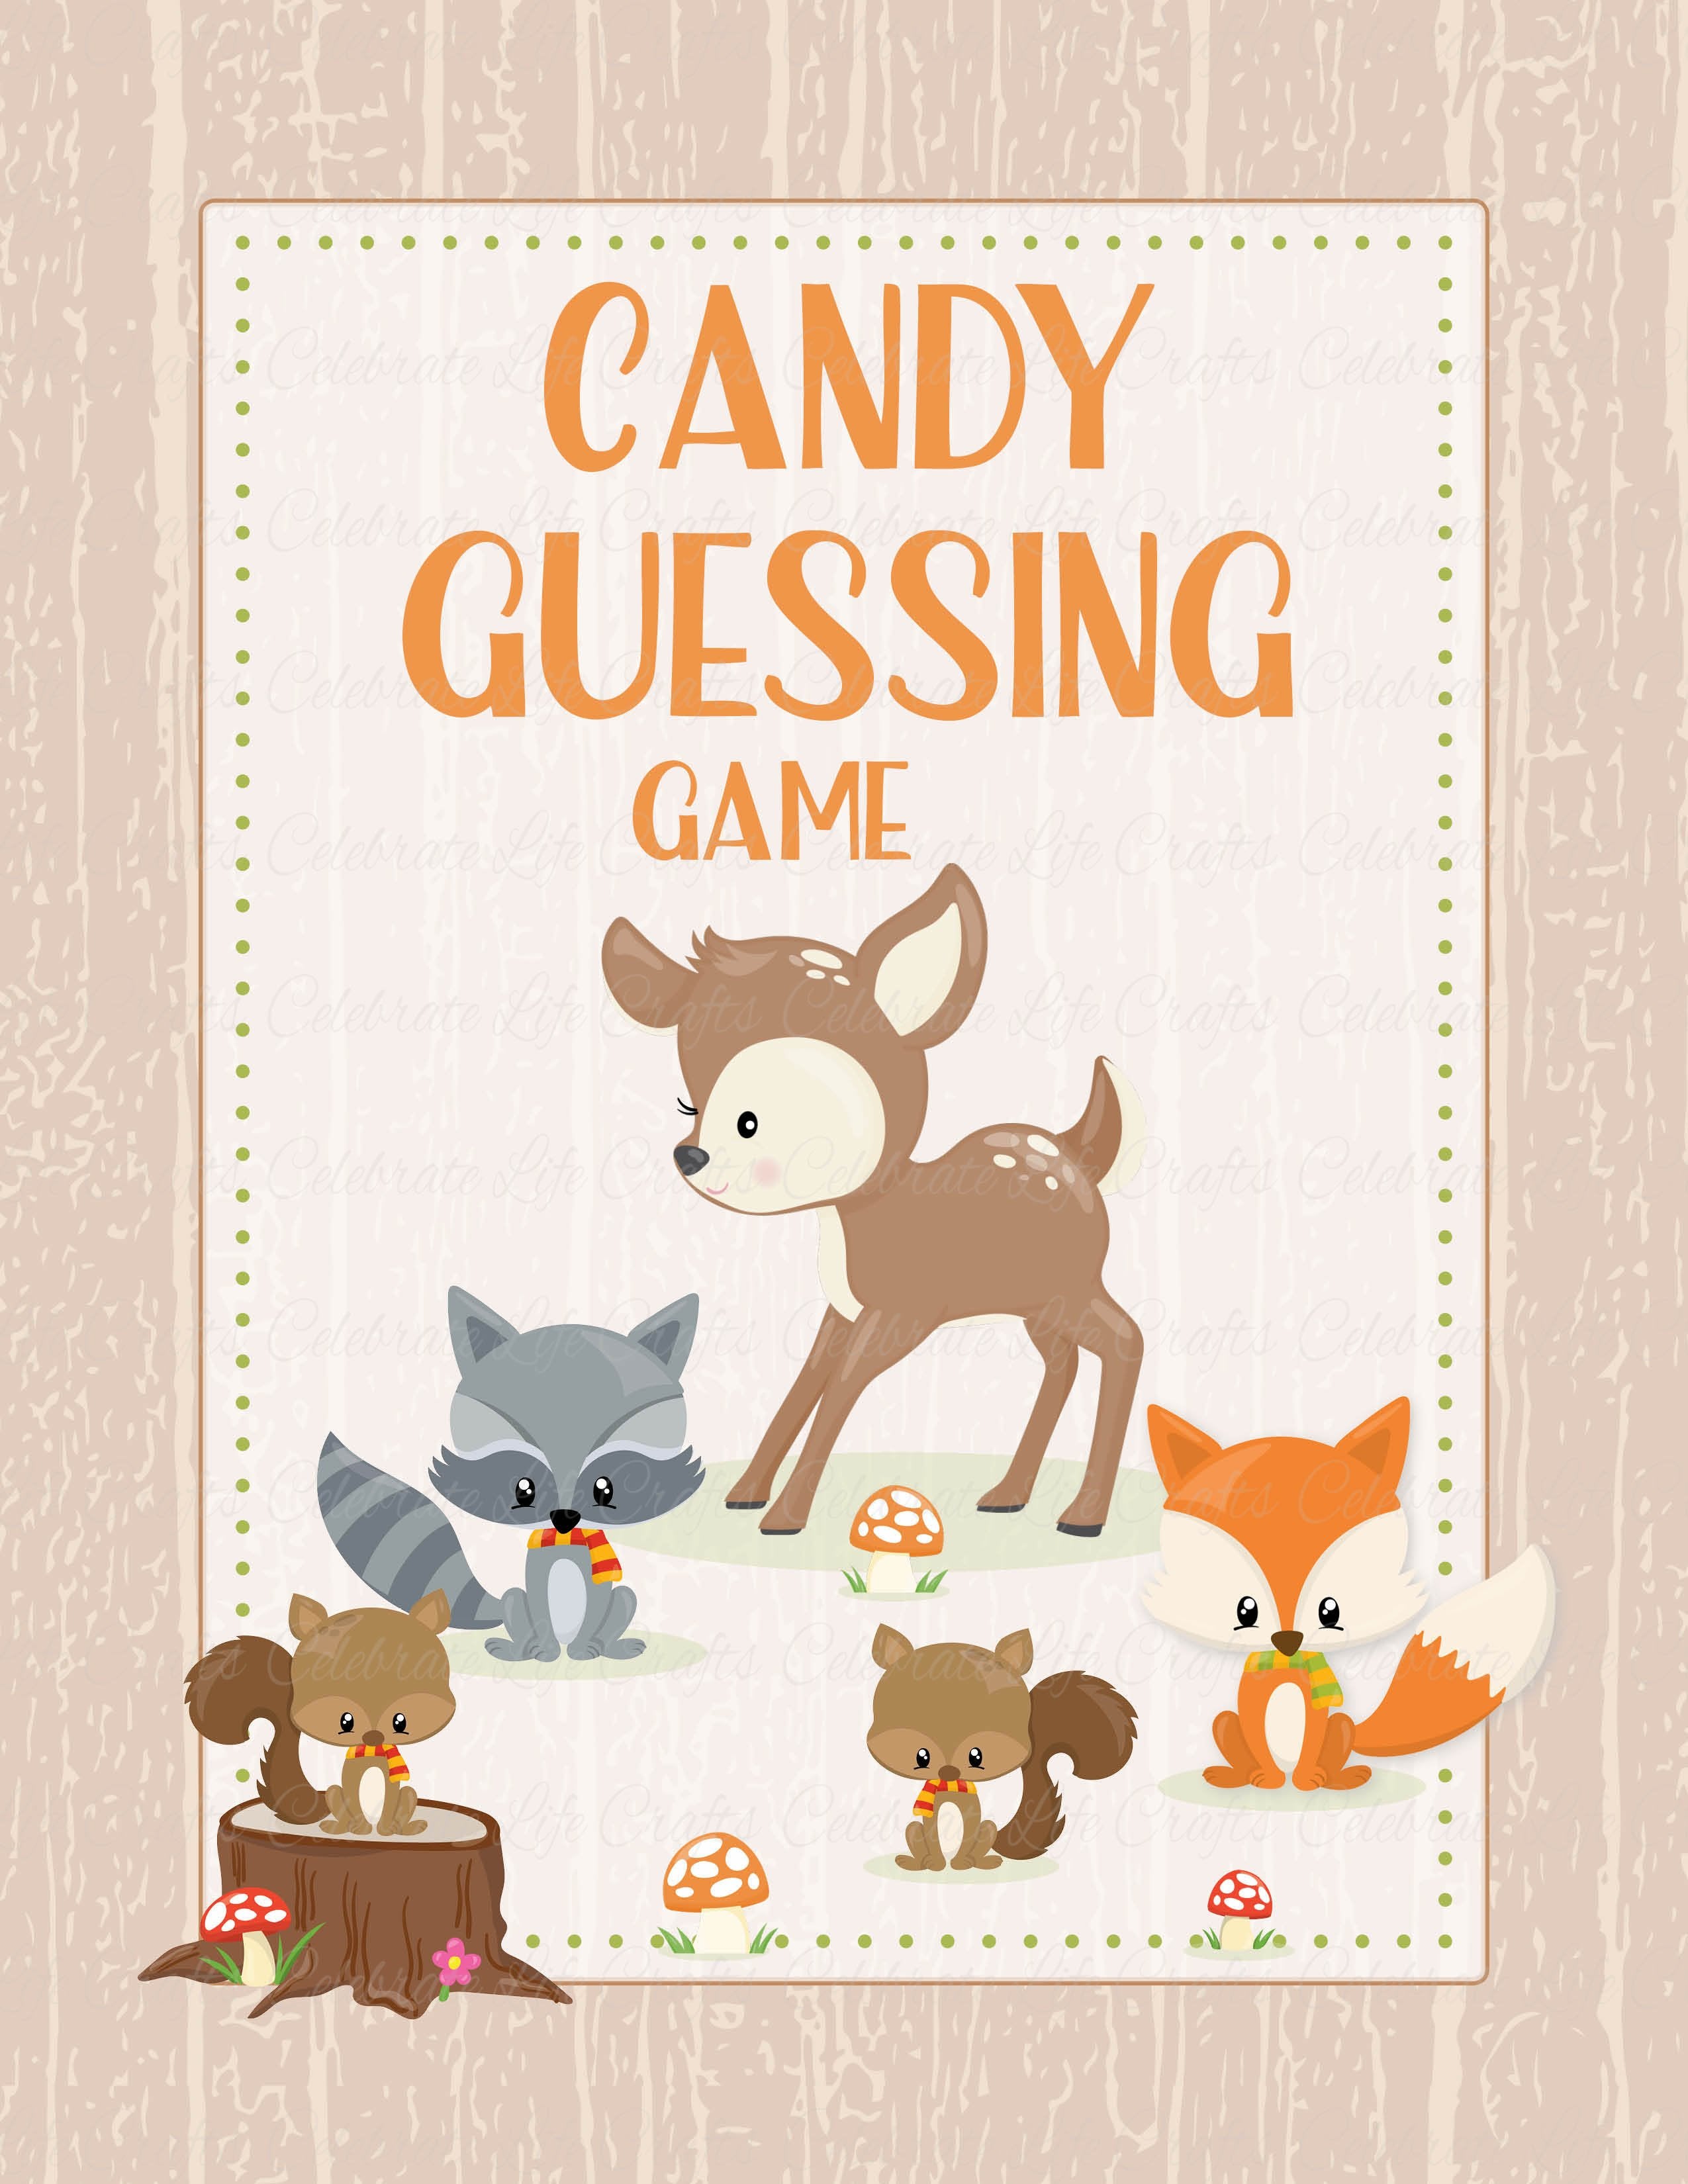 candy-guess-baby-shower-game-forest-animals-woodland-baby-shower-theme-celebrate-life-crafts